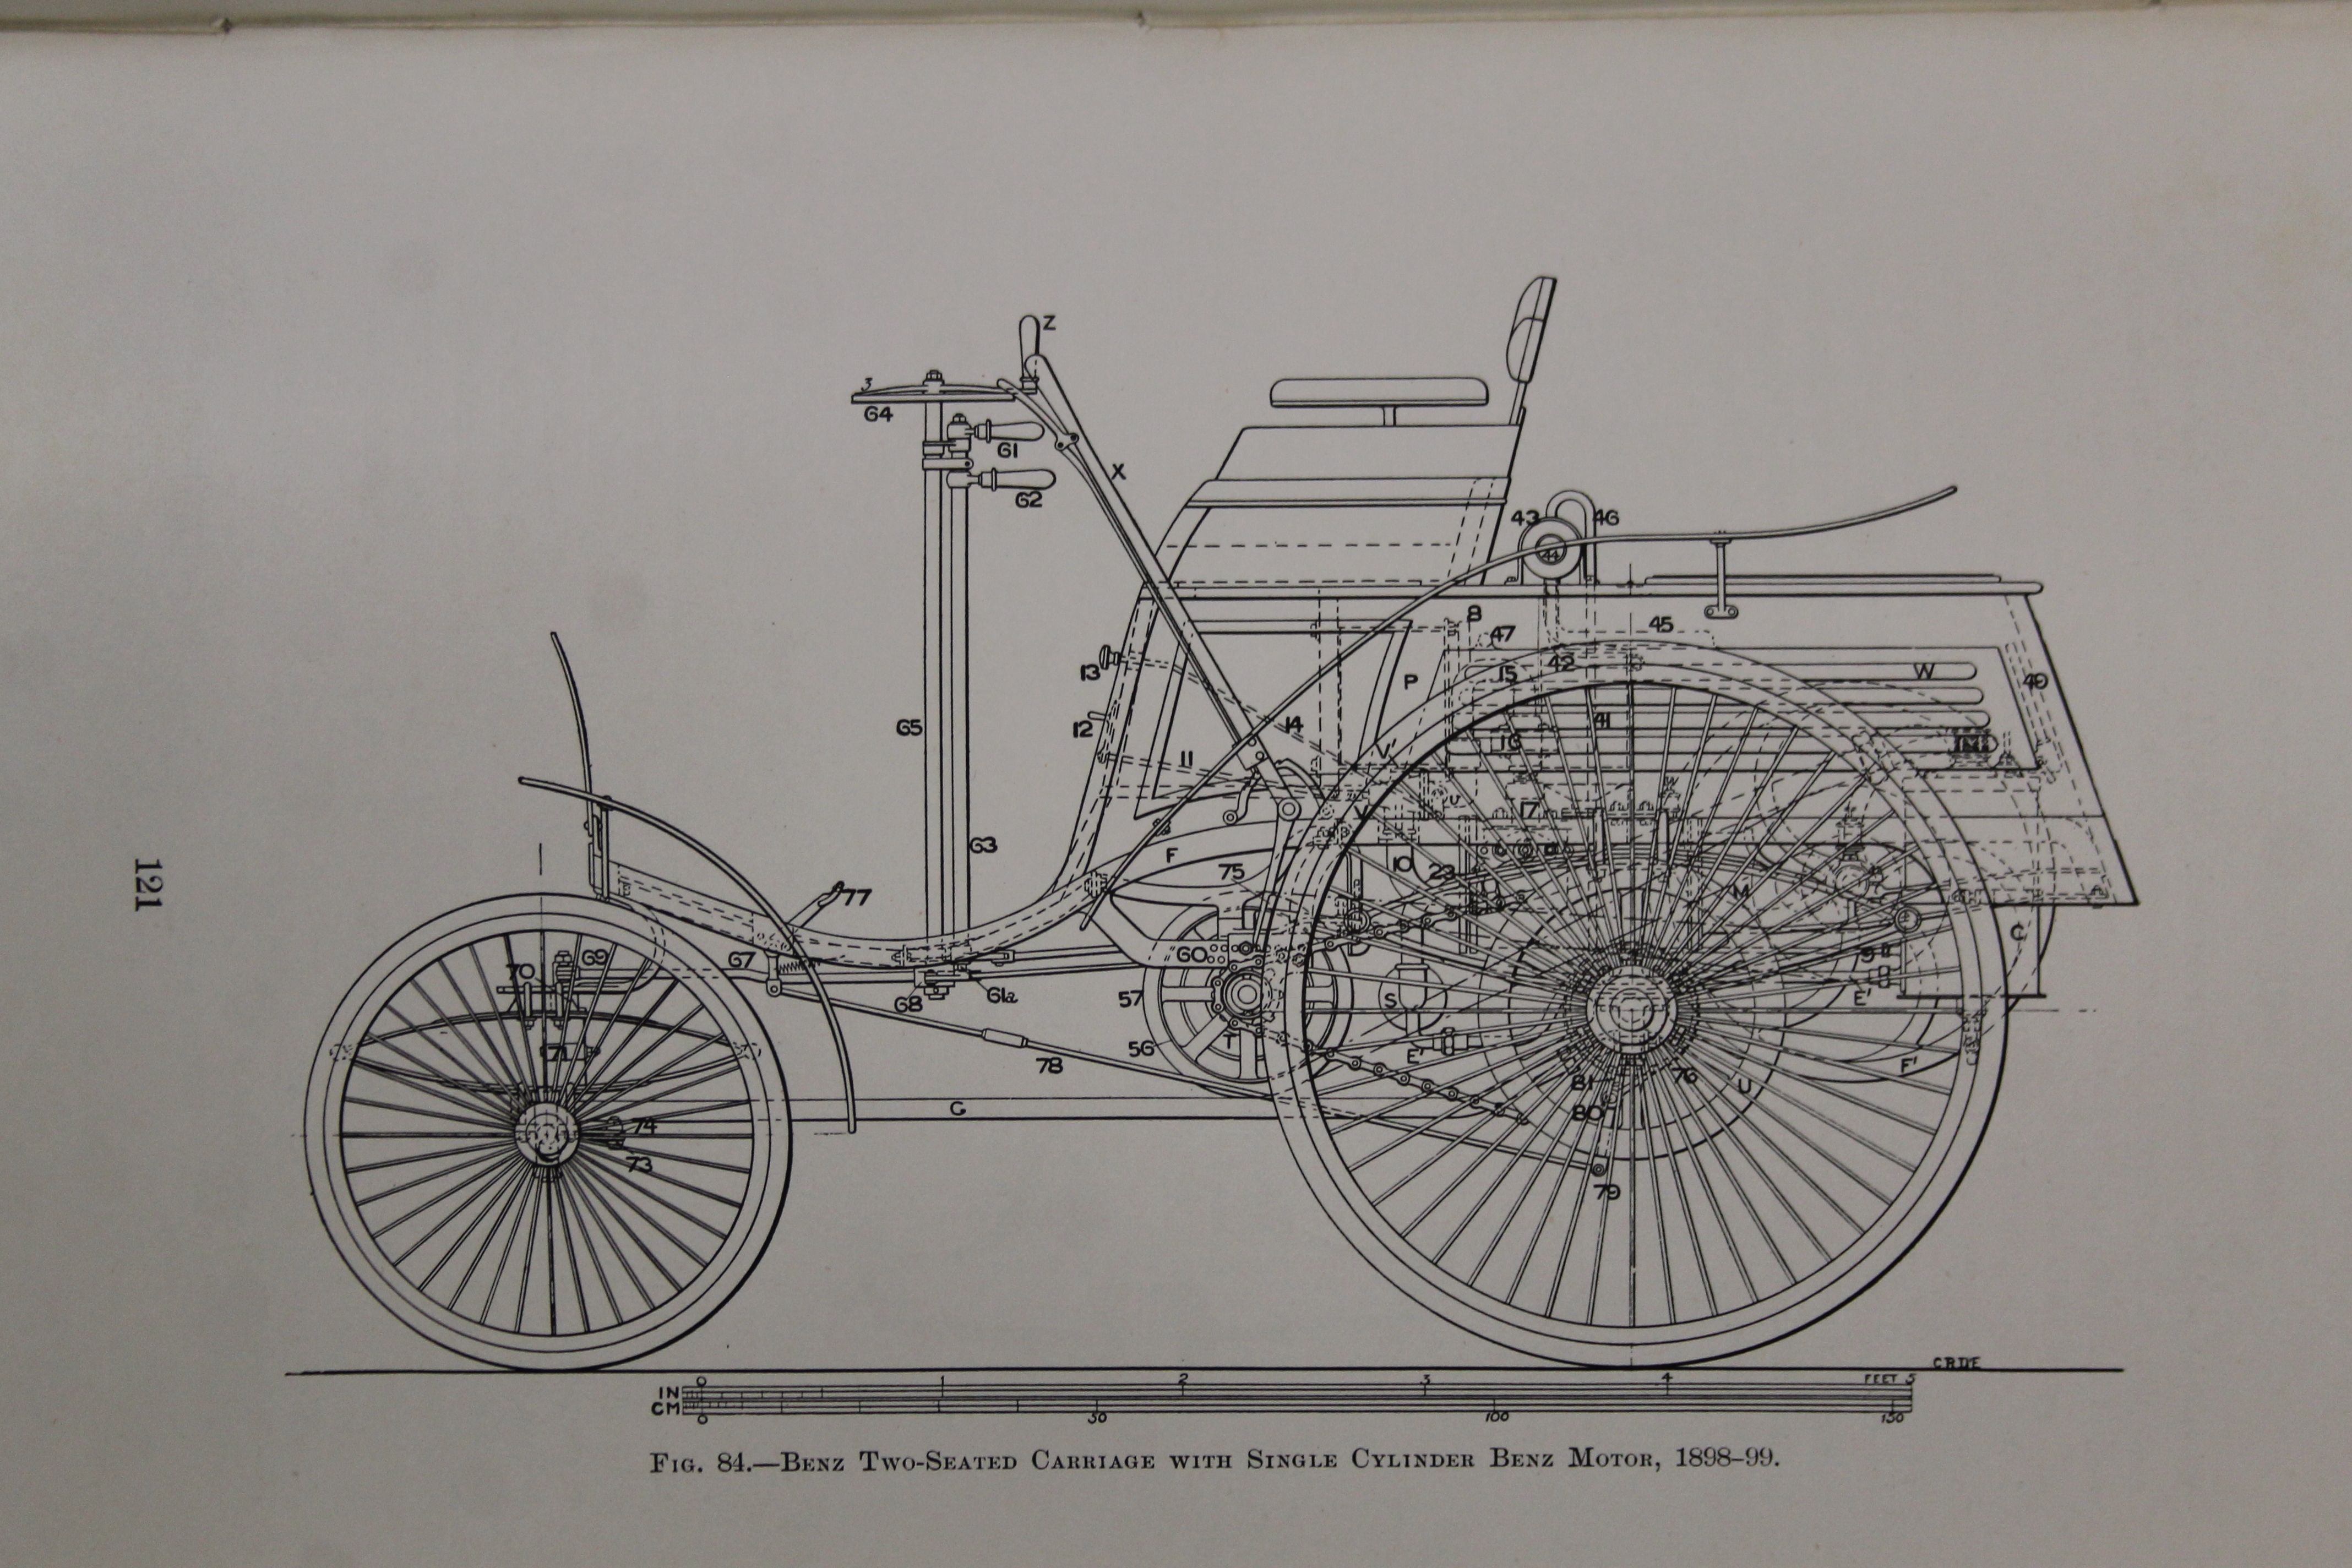 Beaumont (W Worby), Motor Vehicles and Motors, Their Design, Construction and Working by Steam, - Image 10 of 10